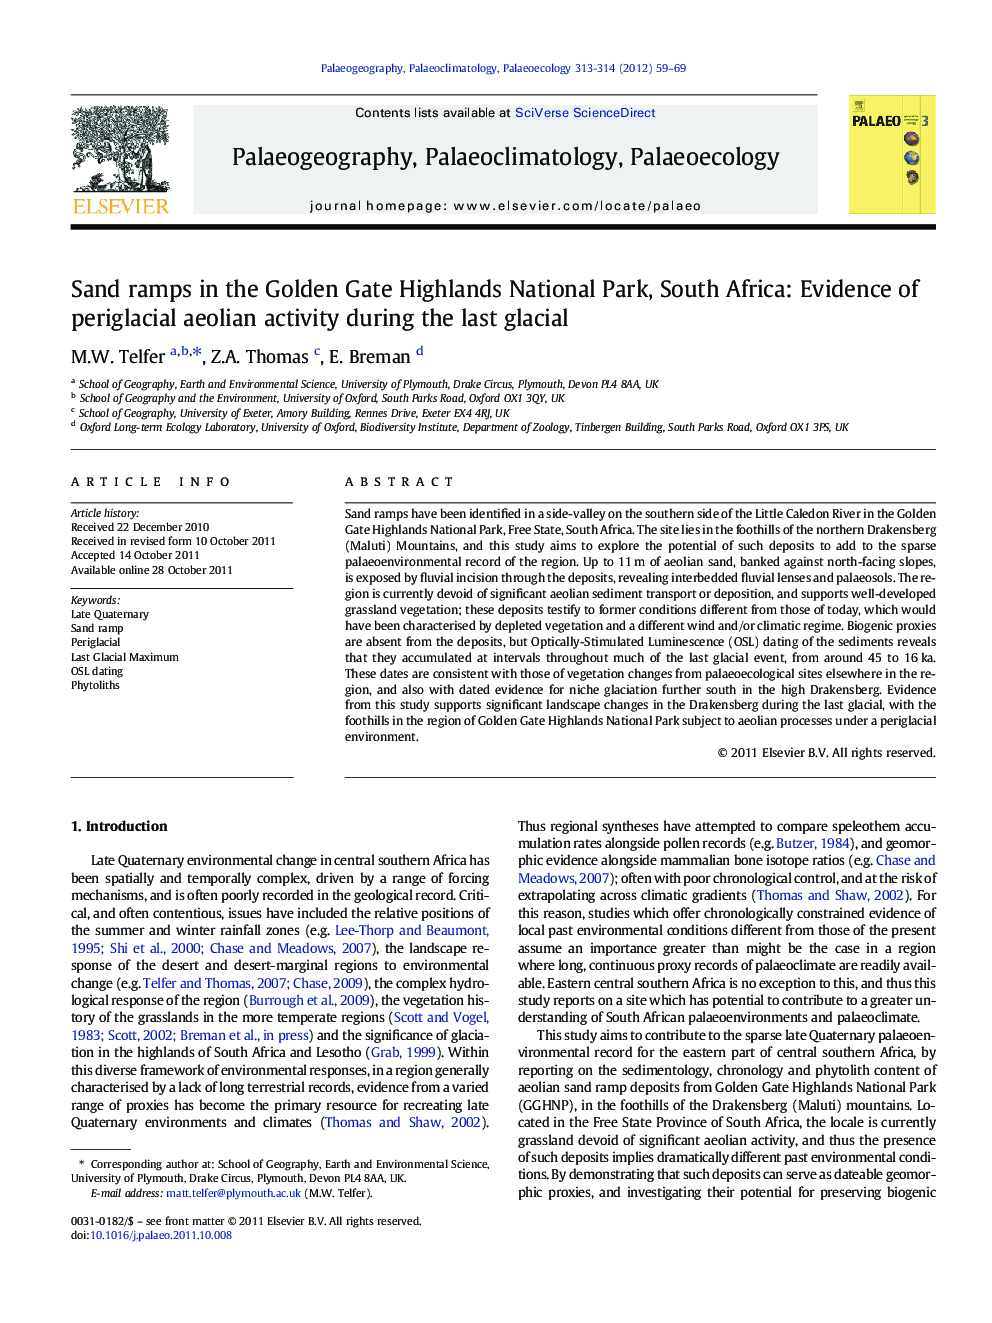 Sand ramps in the Golden Gate Highlands National Park, South Africa: Evidence of periglacial aeolian activity during the last glacial